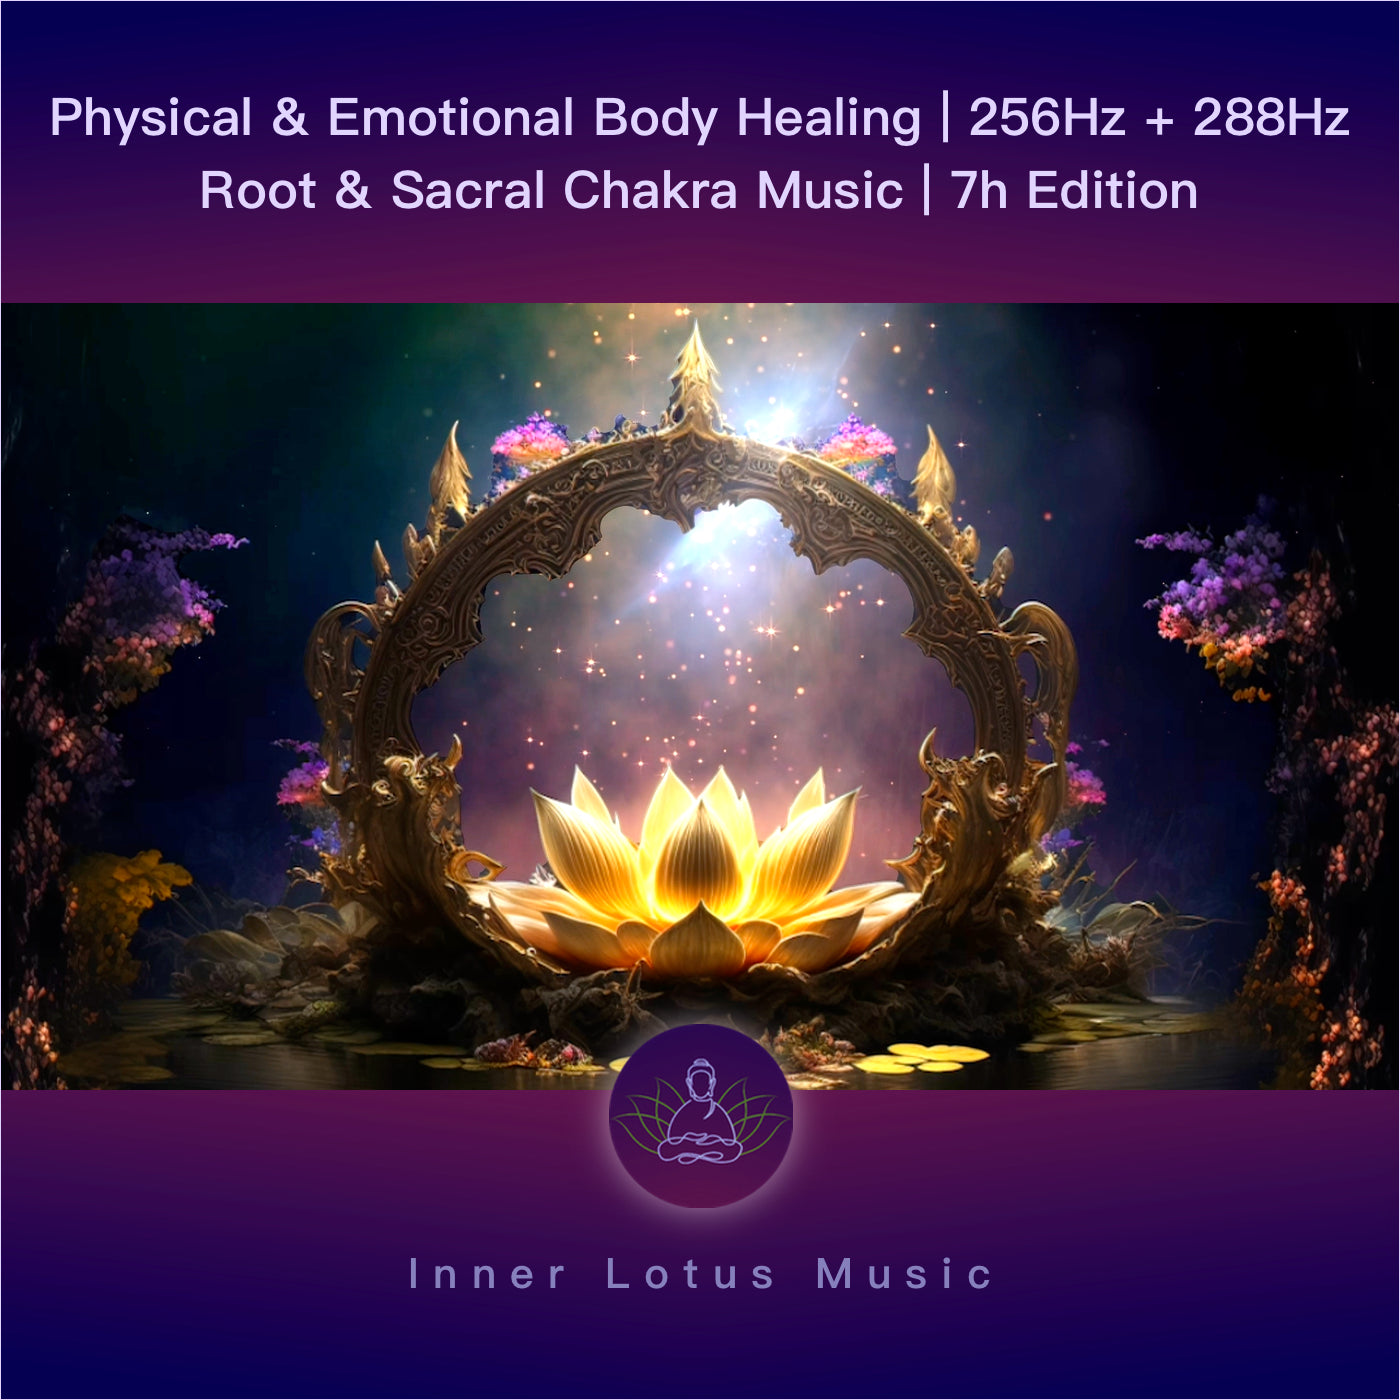 Physical & Emotional Body Healing | 256Hz + 288Hz Root & Sacral Chakra Music | 7h Edition